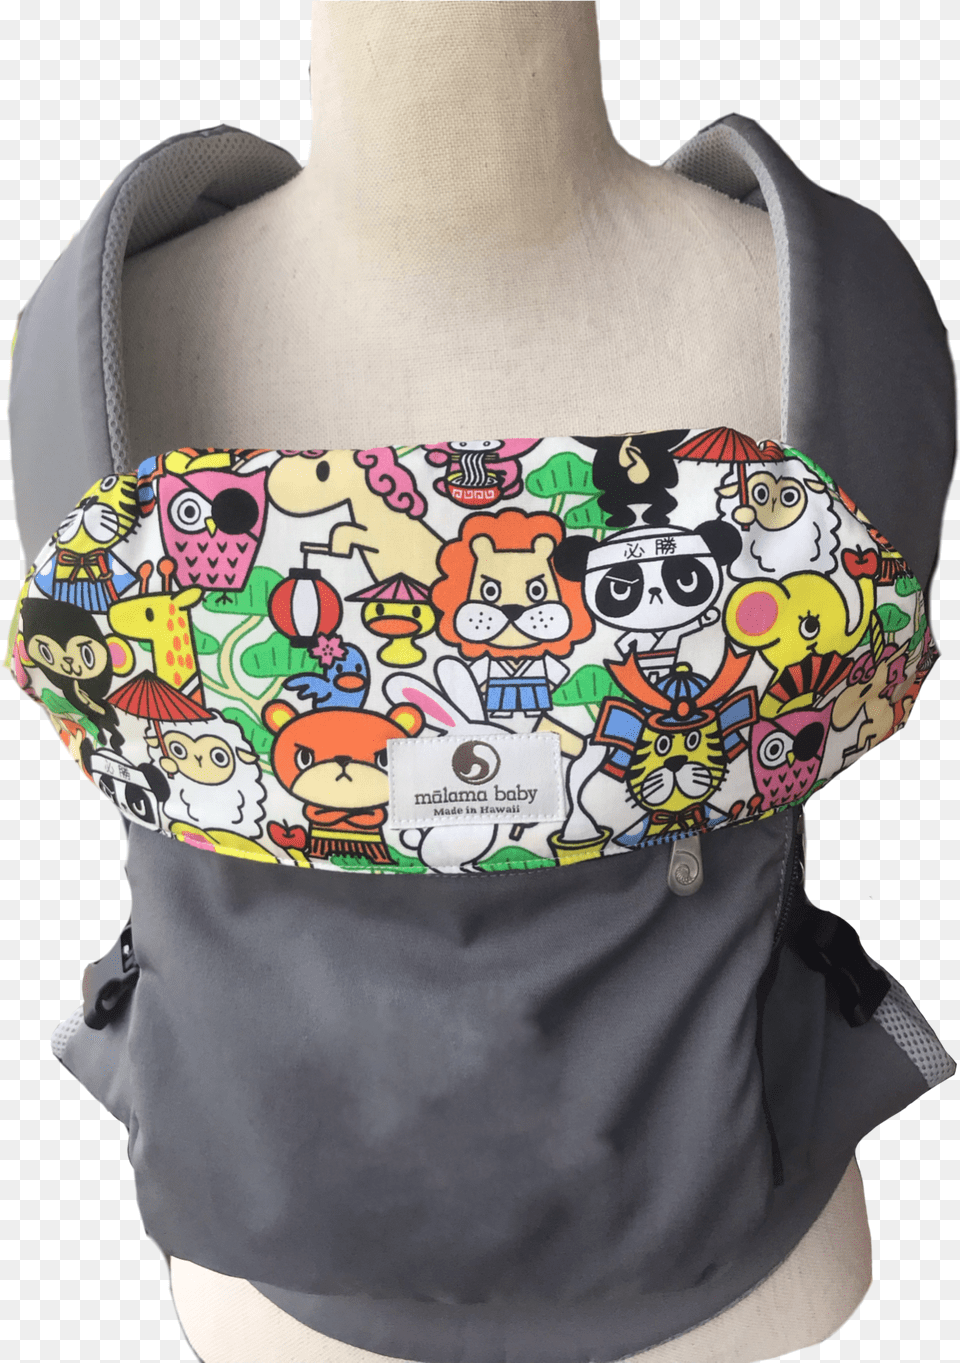 Infant Carrier Bib Anime Swimsuit Top, Cushion, Home Decor, Bag, Blouse Free Png Download